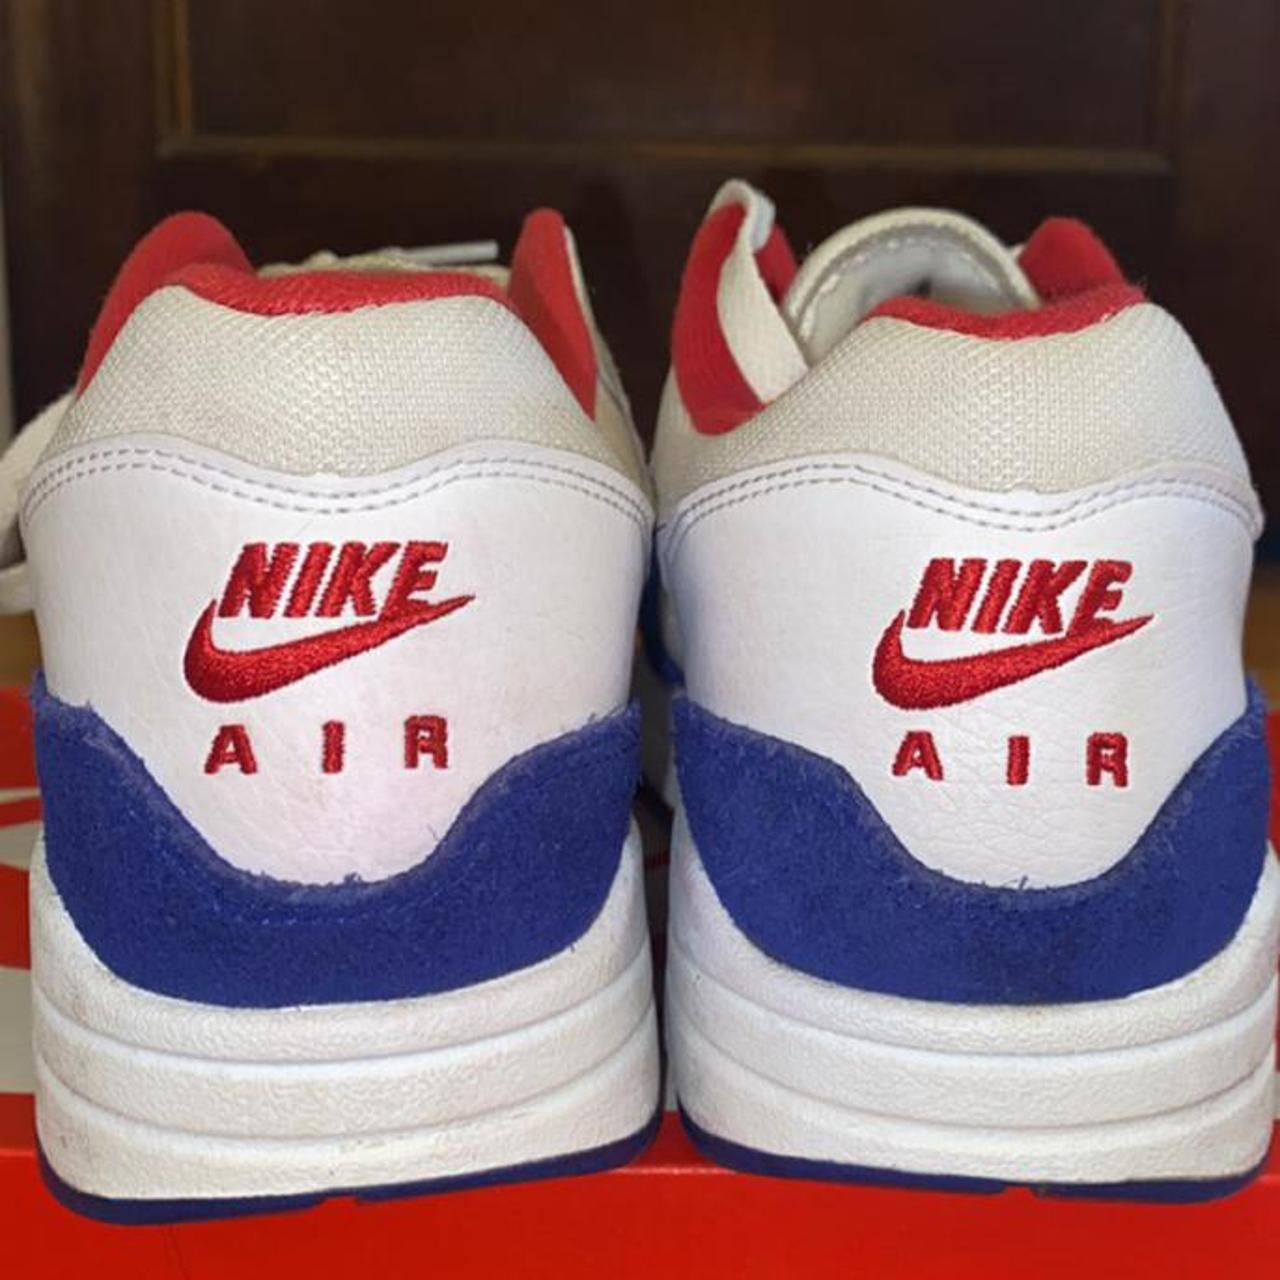 Nike Air Max 1’s . In great condition other than the... - Depop